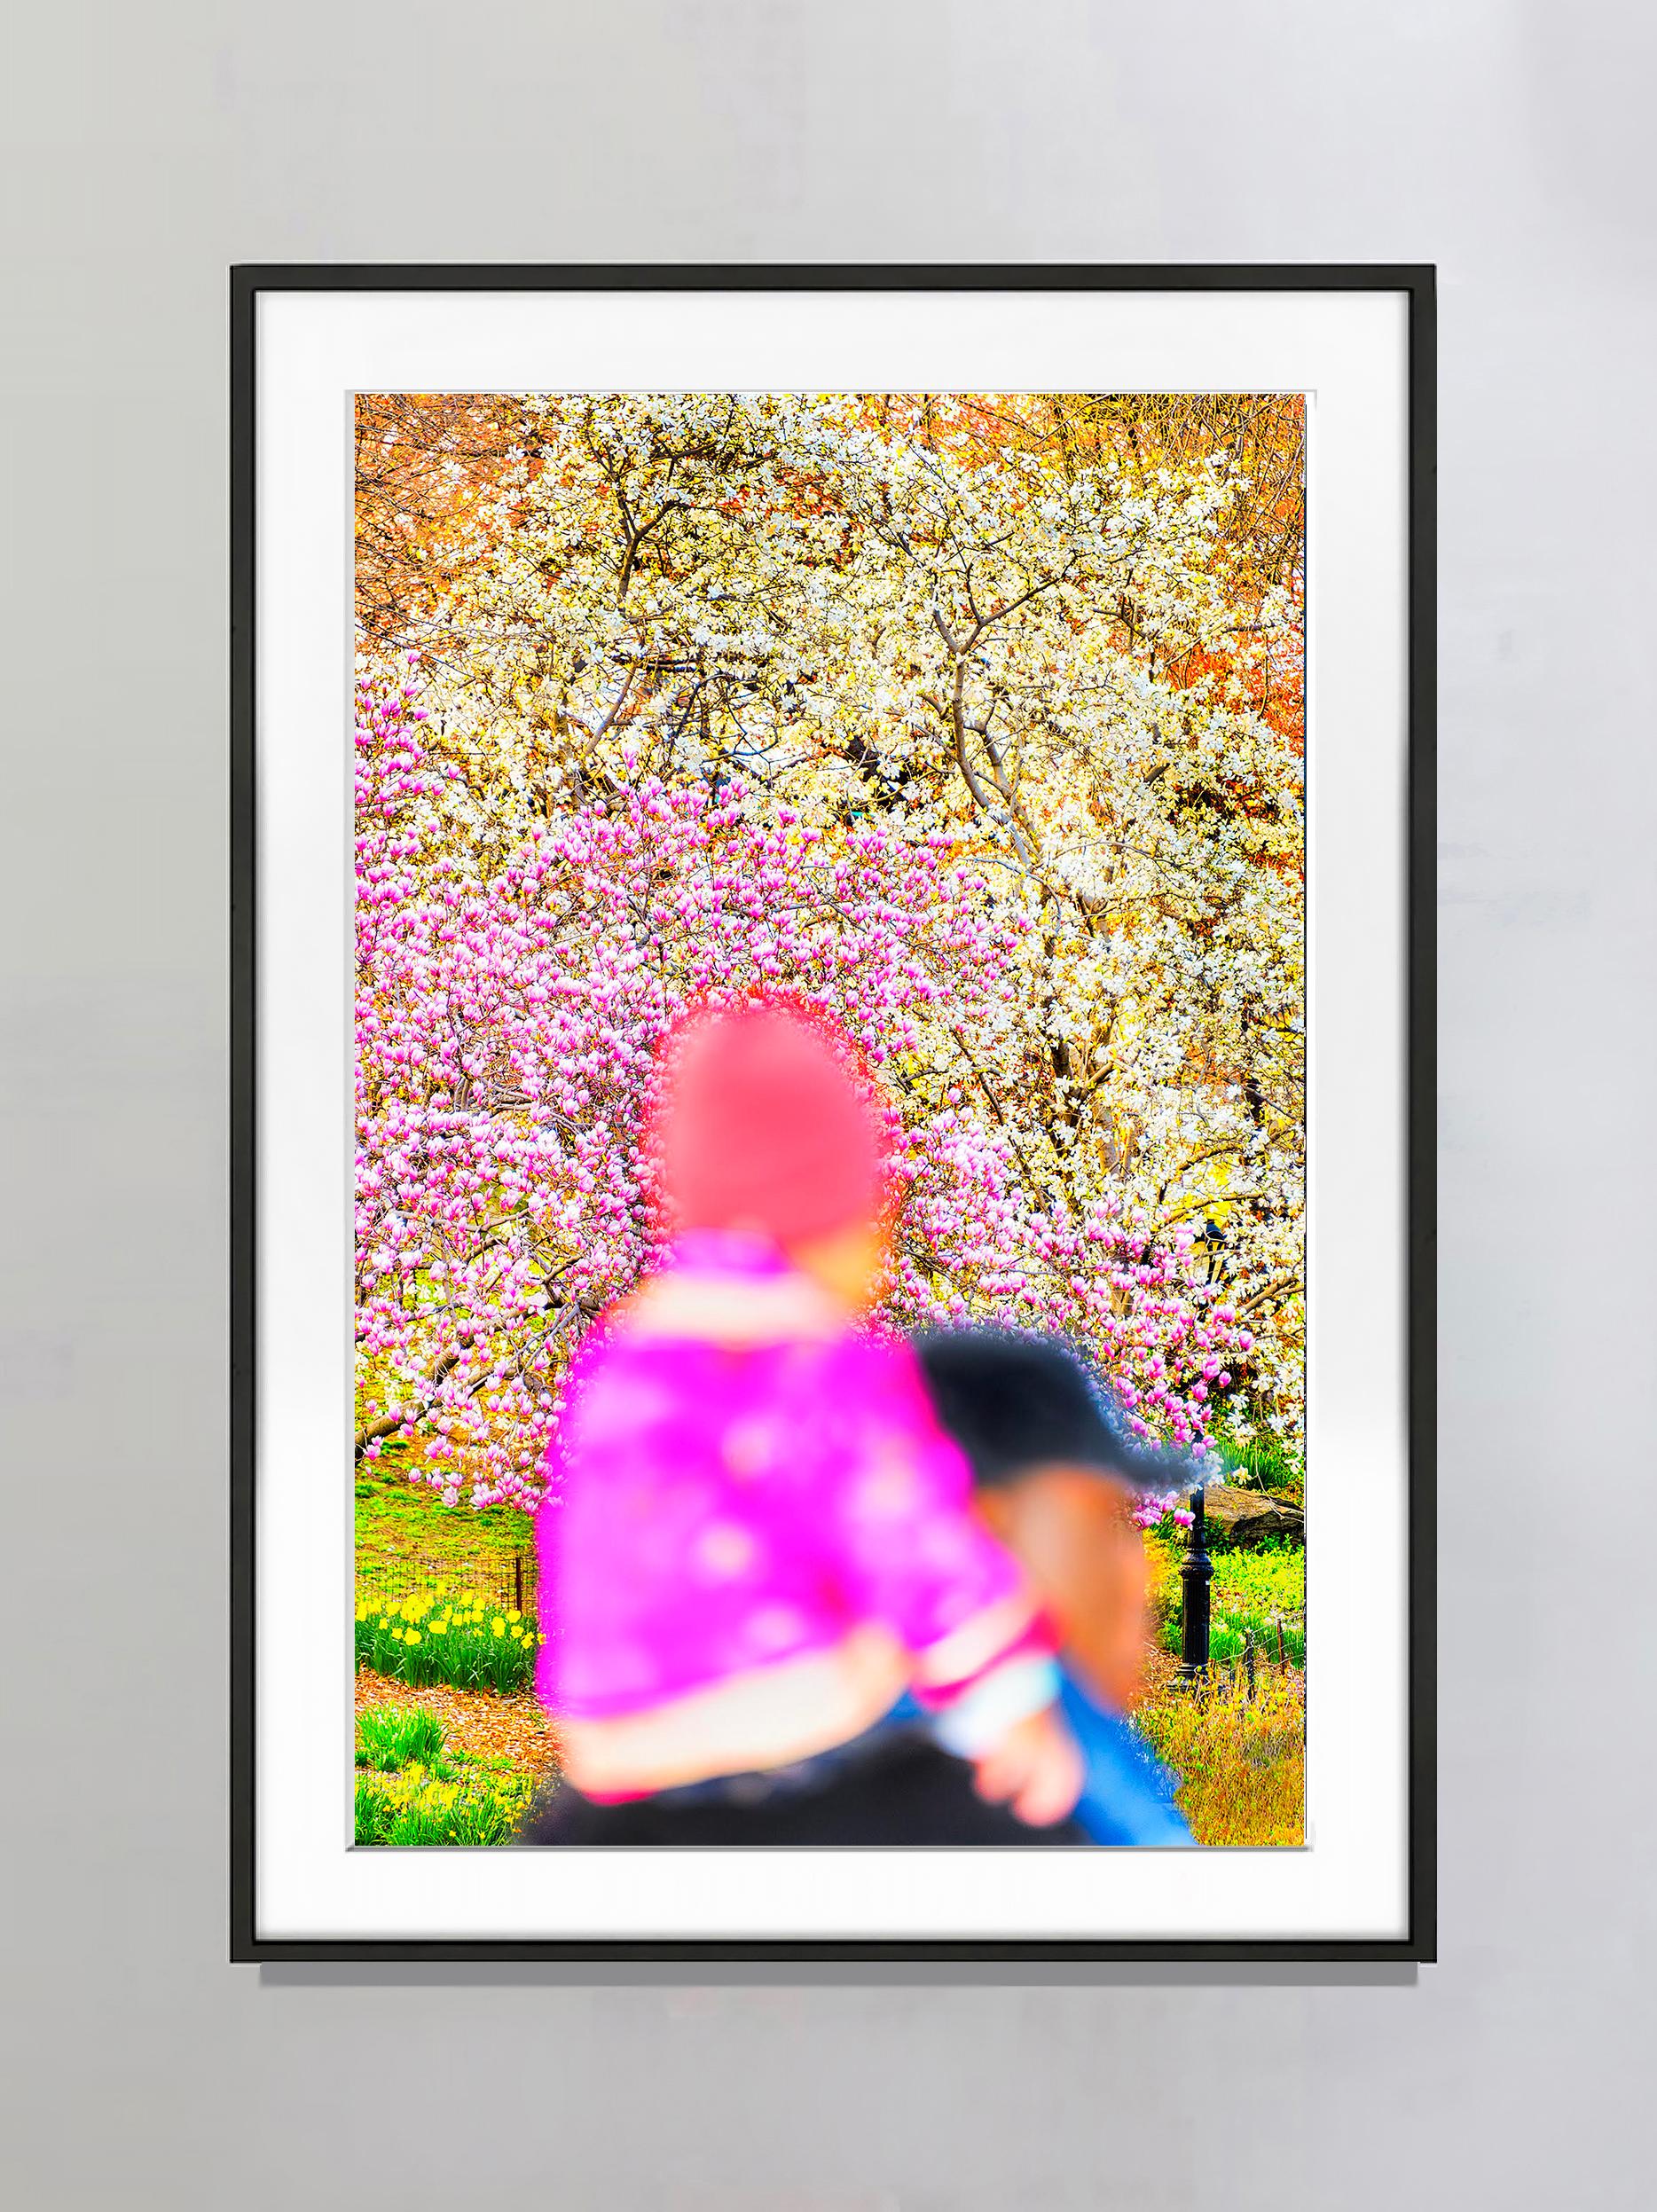 Child in Pink on Father's Shoulders Against Cherry Blossoms - Photograph by Mitchell Funk